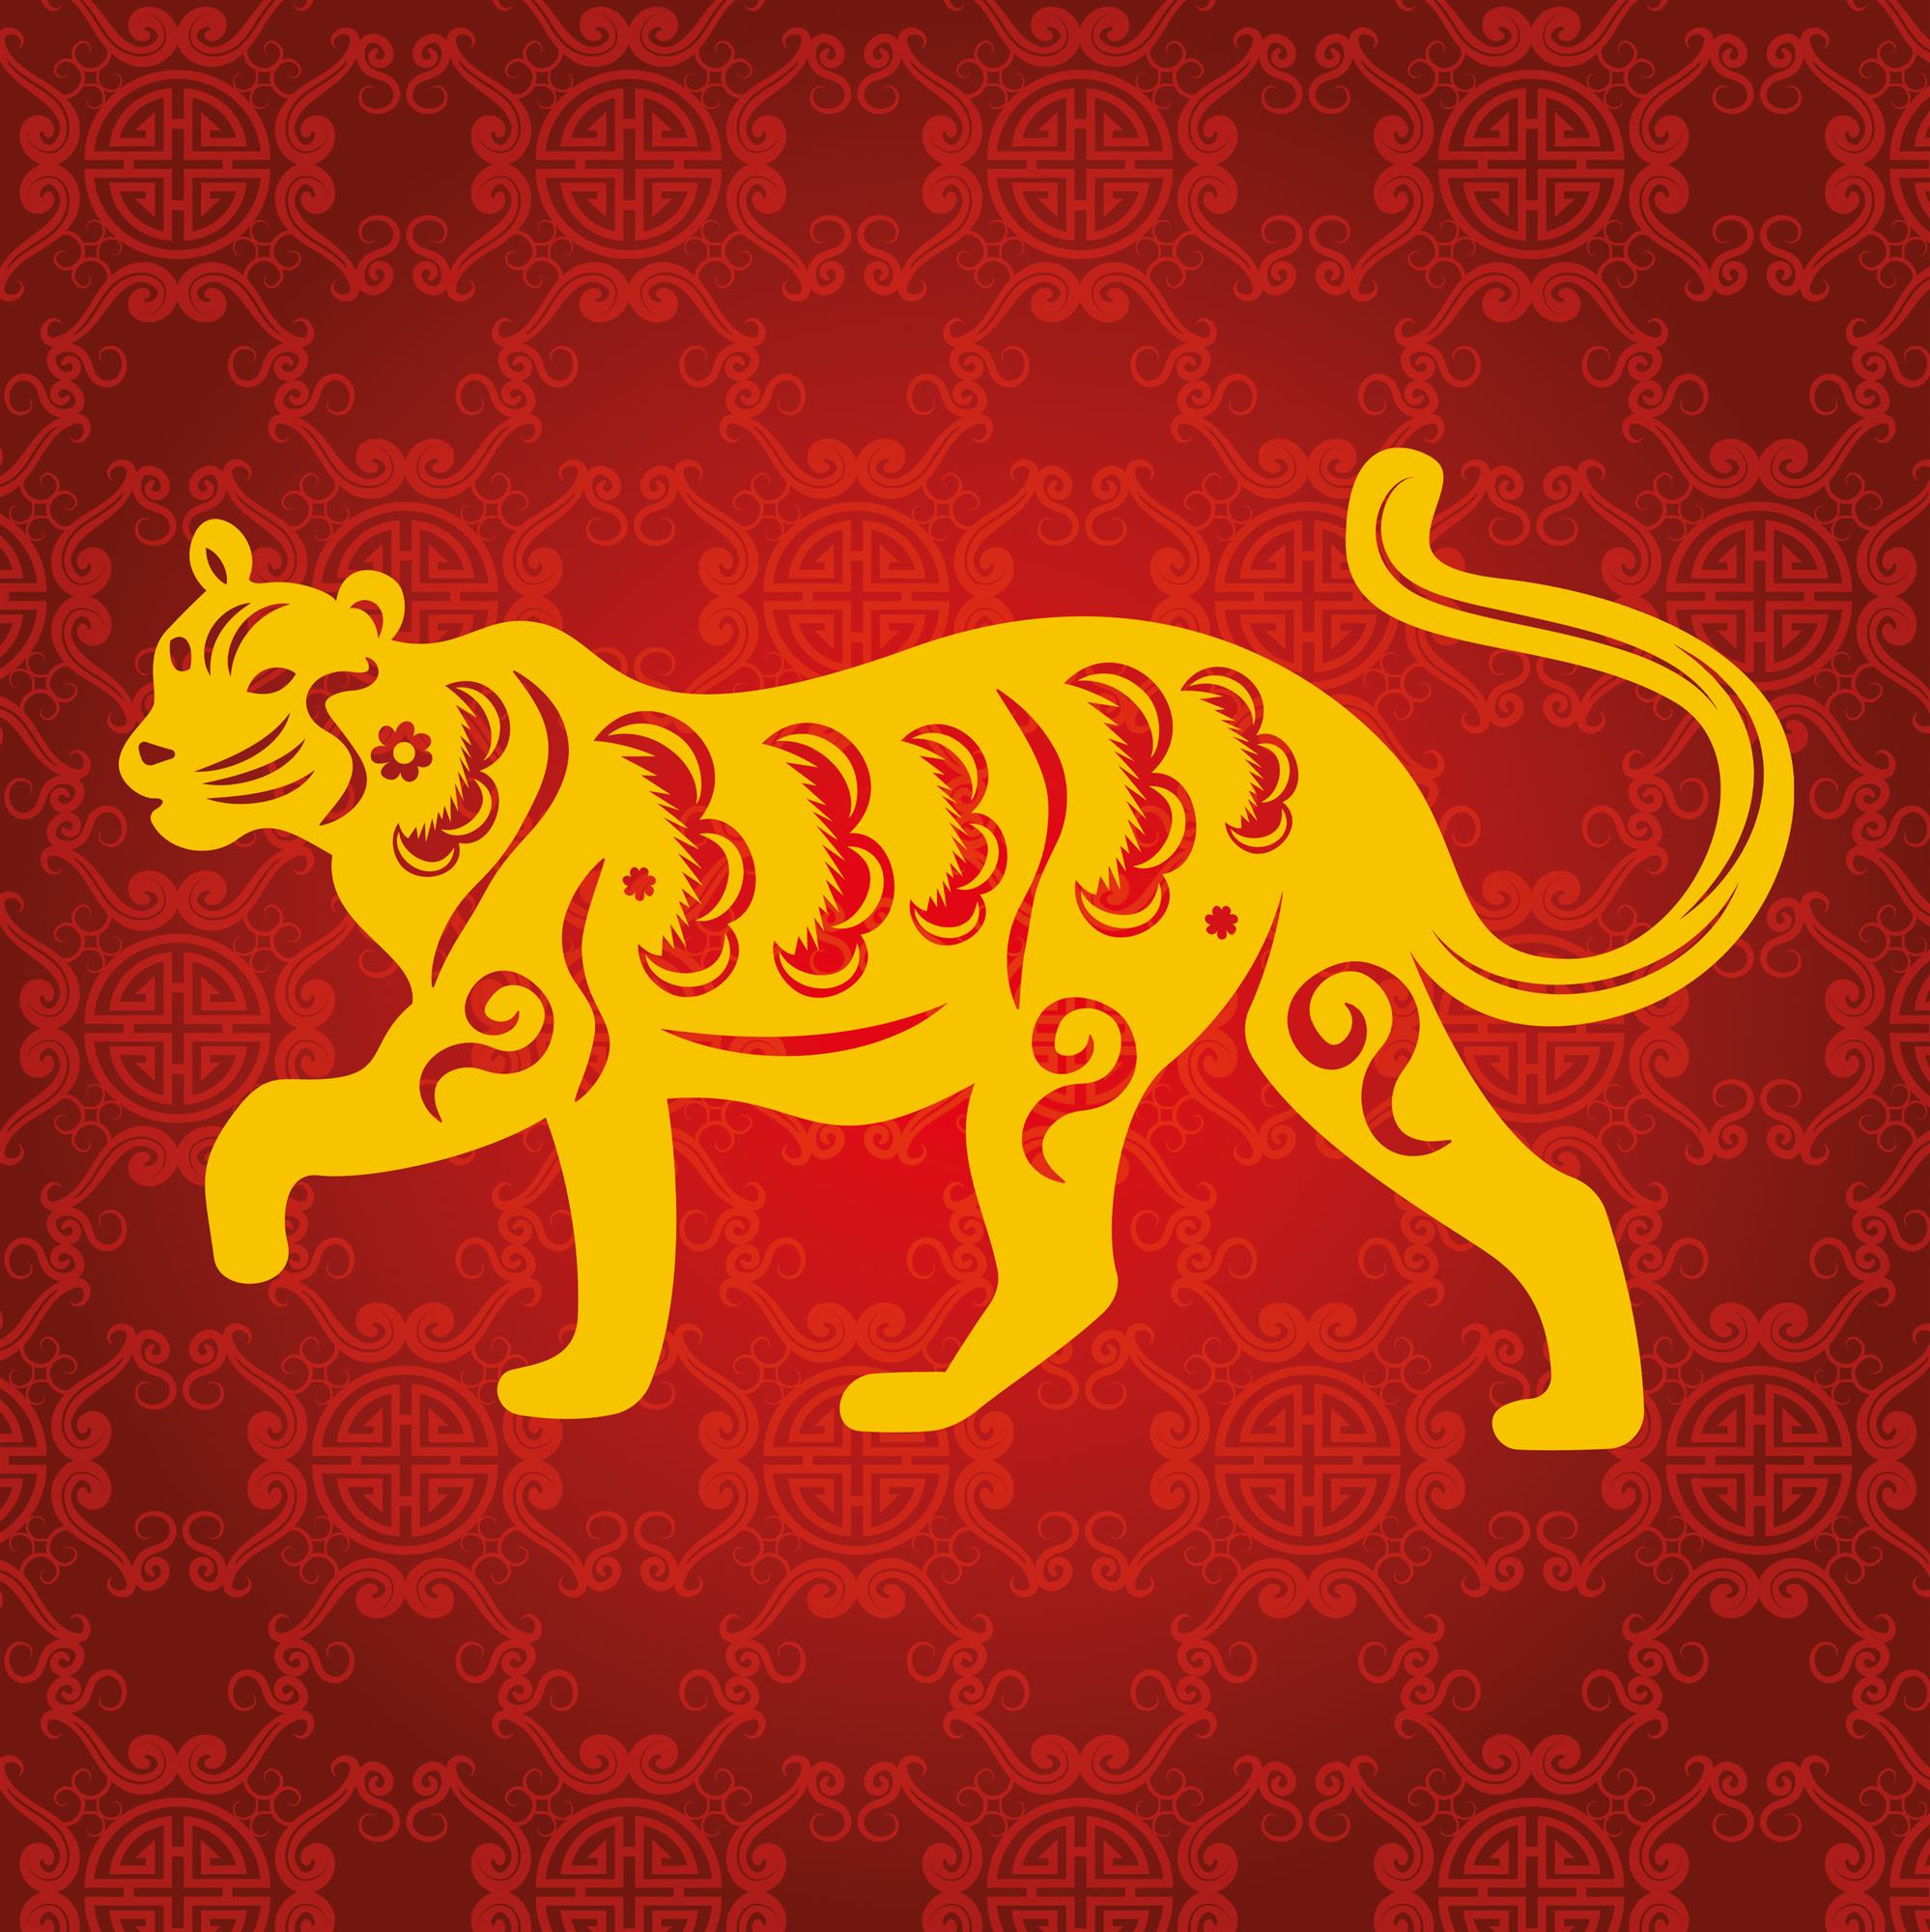 Chinese style illustration in red and yellow of a tiger